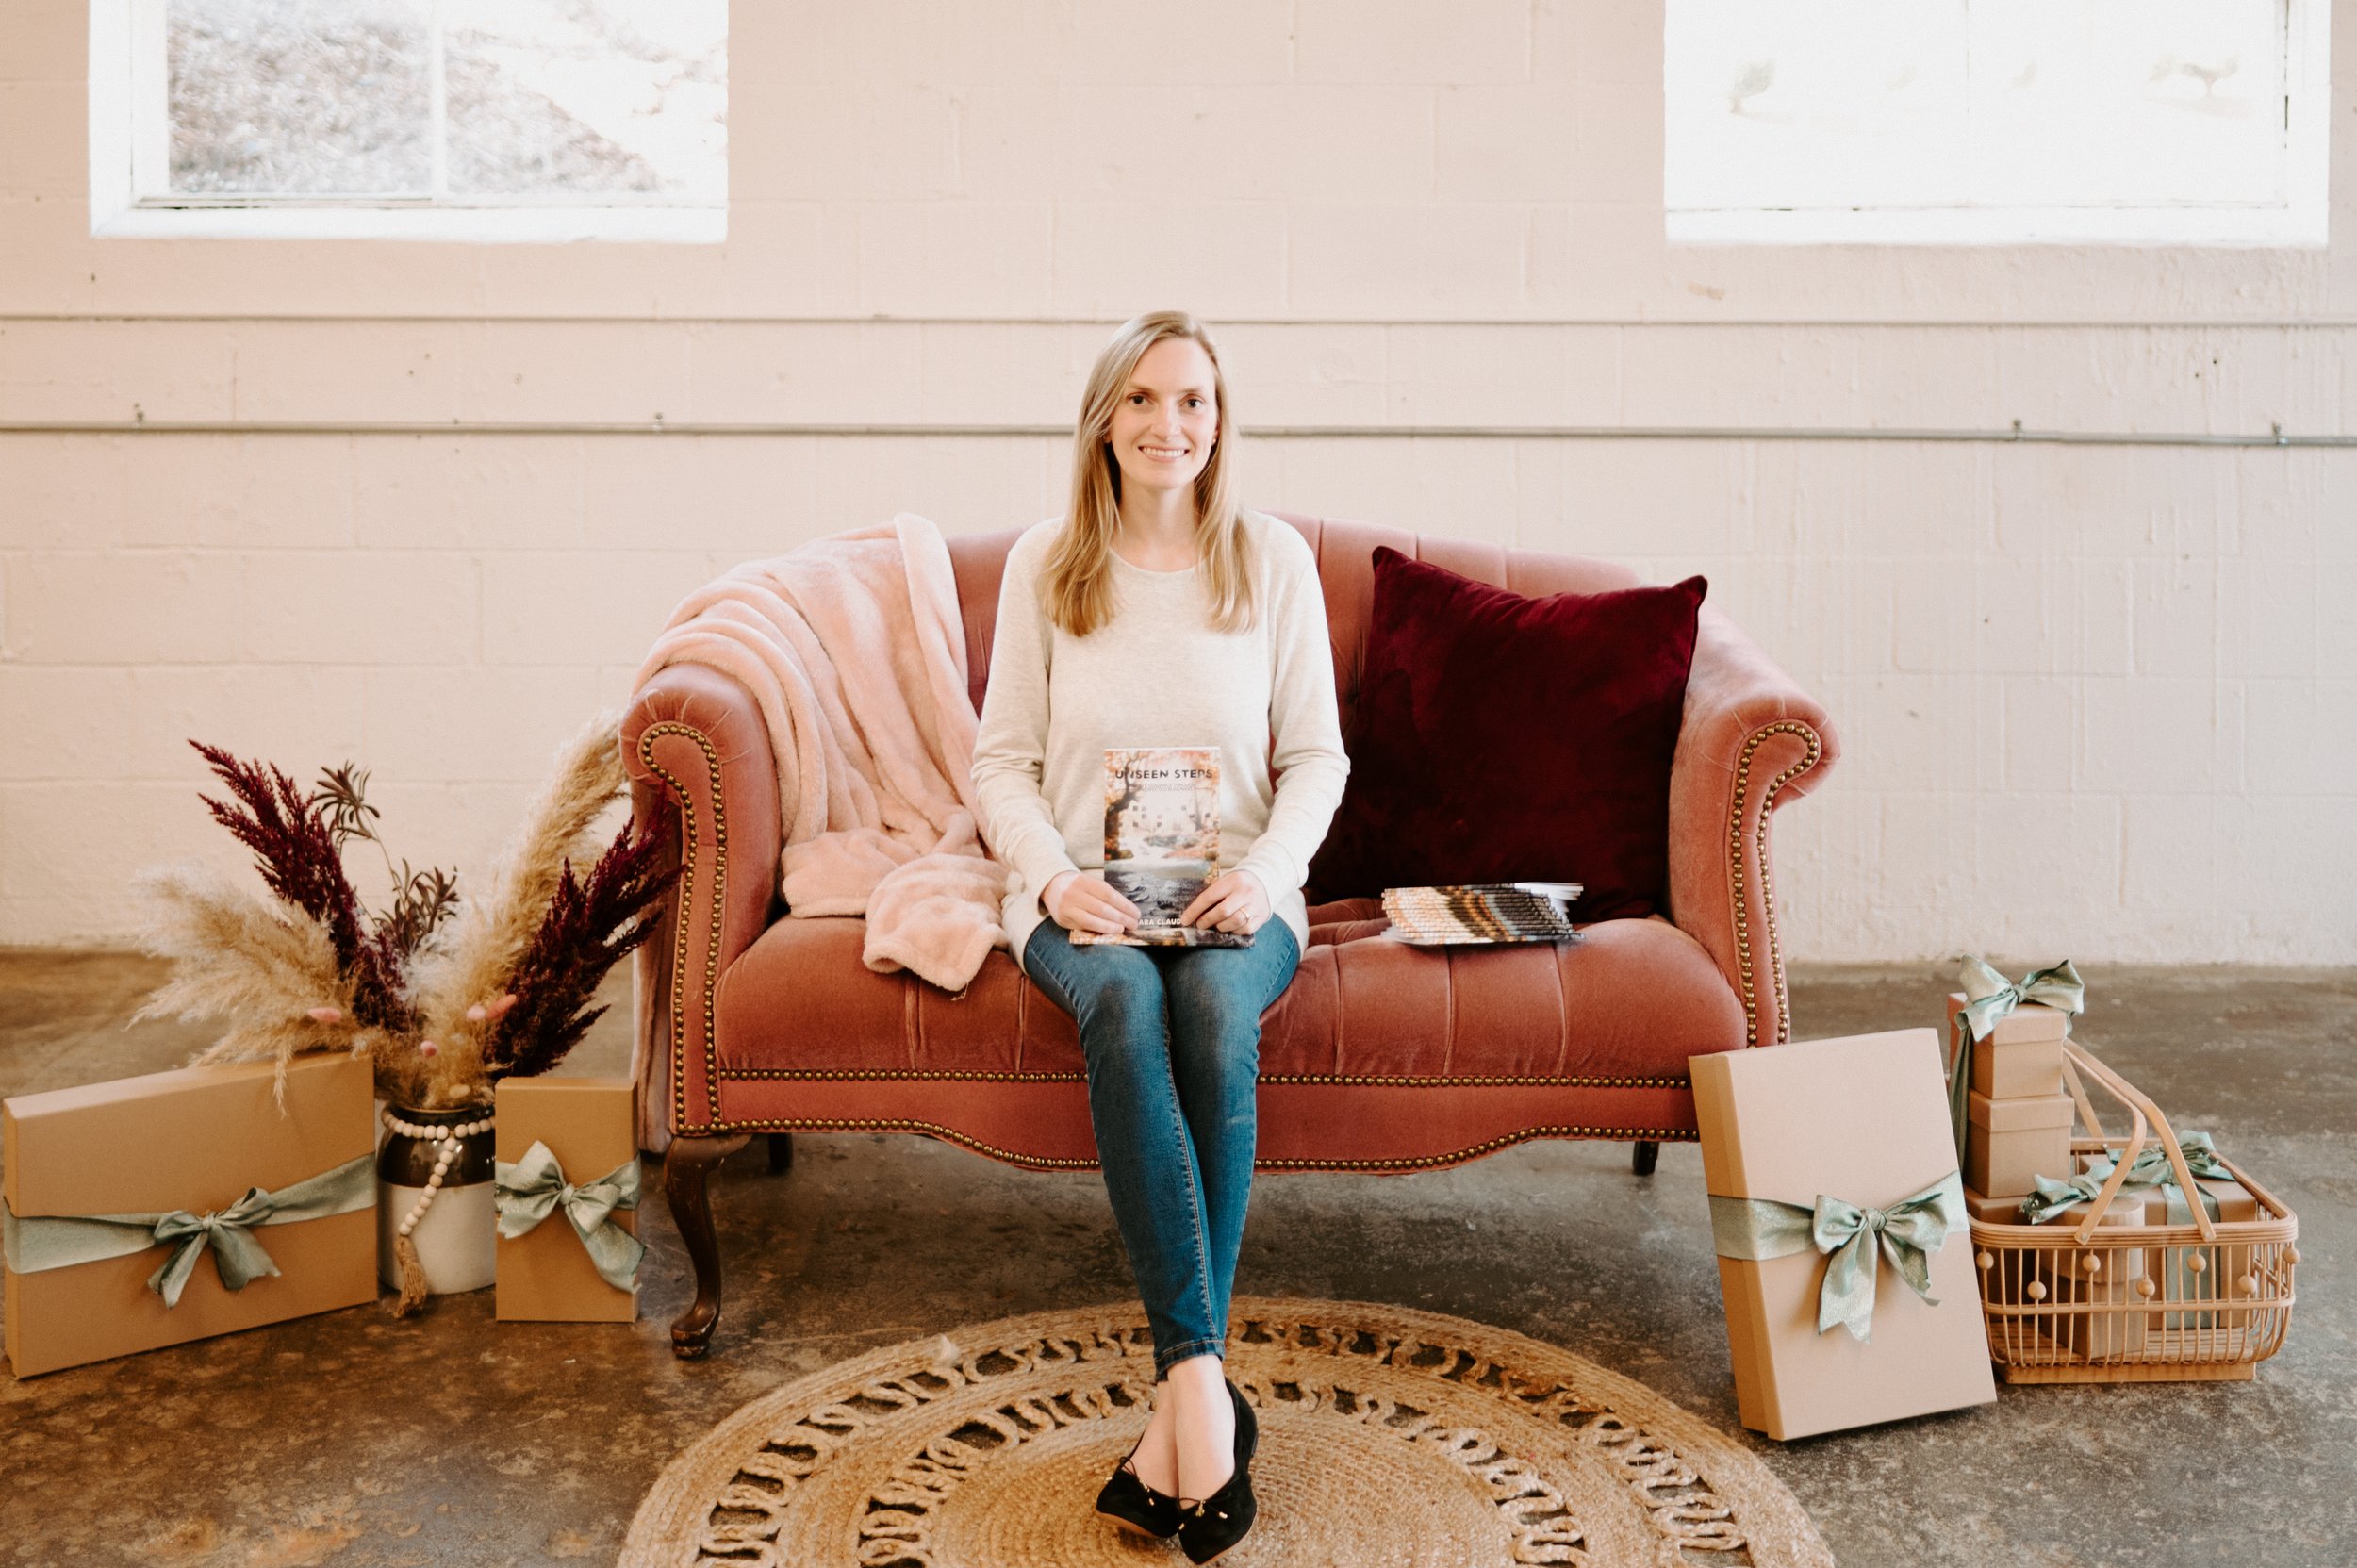 Full body shot of SC in cream top and jeans, sitting on couch with ankles crossed, holding Unseen Steps in lap, smiling at the camera.jpg